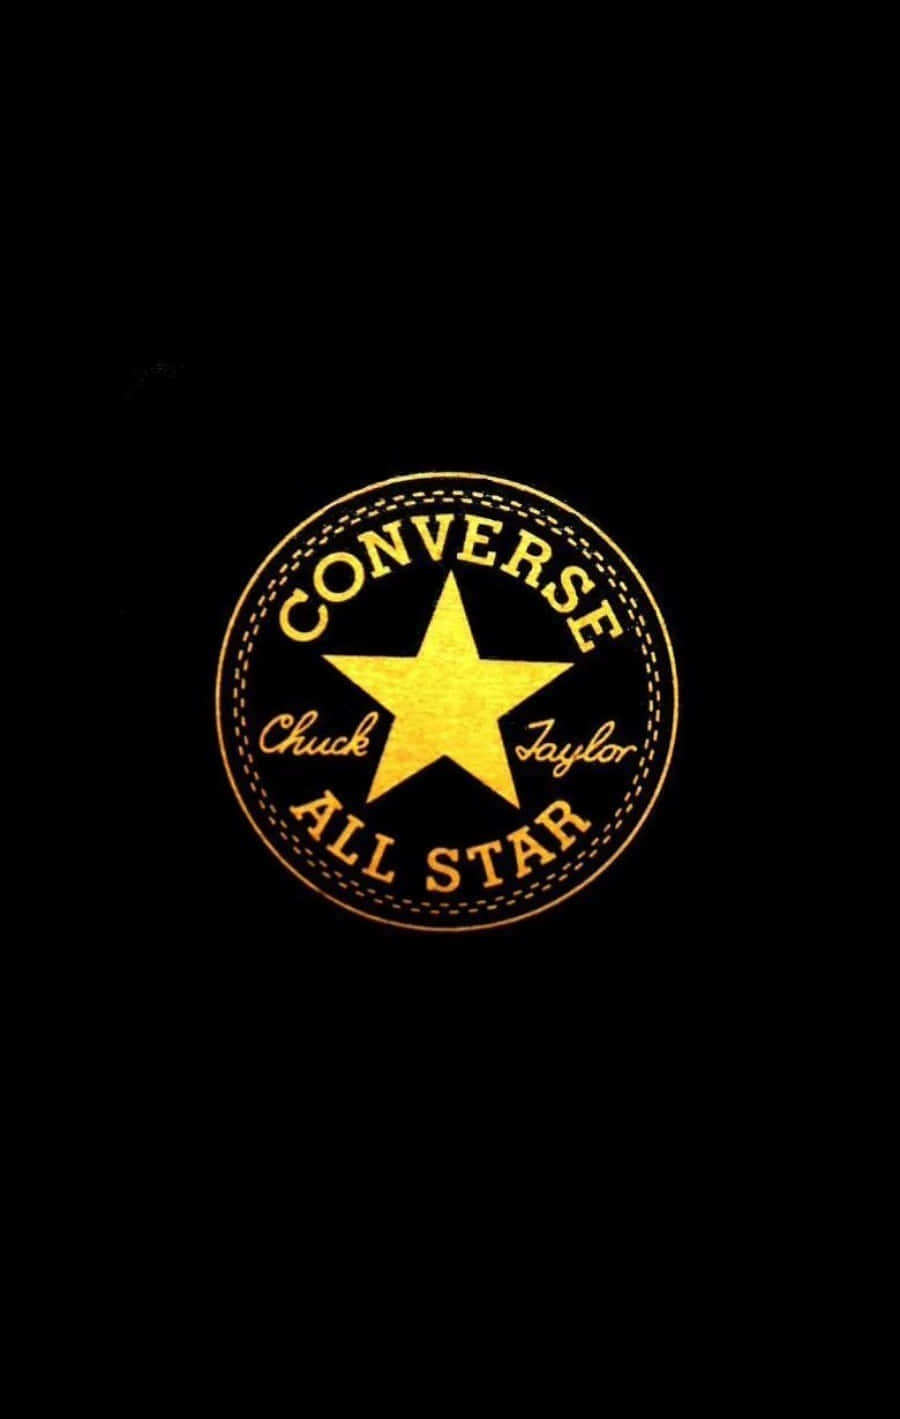 Download An Up-Close Look at the Converse Logo | Wallpapers.com